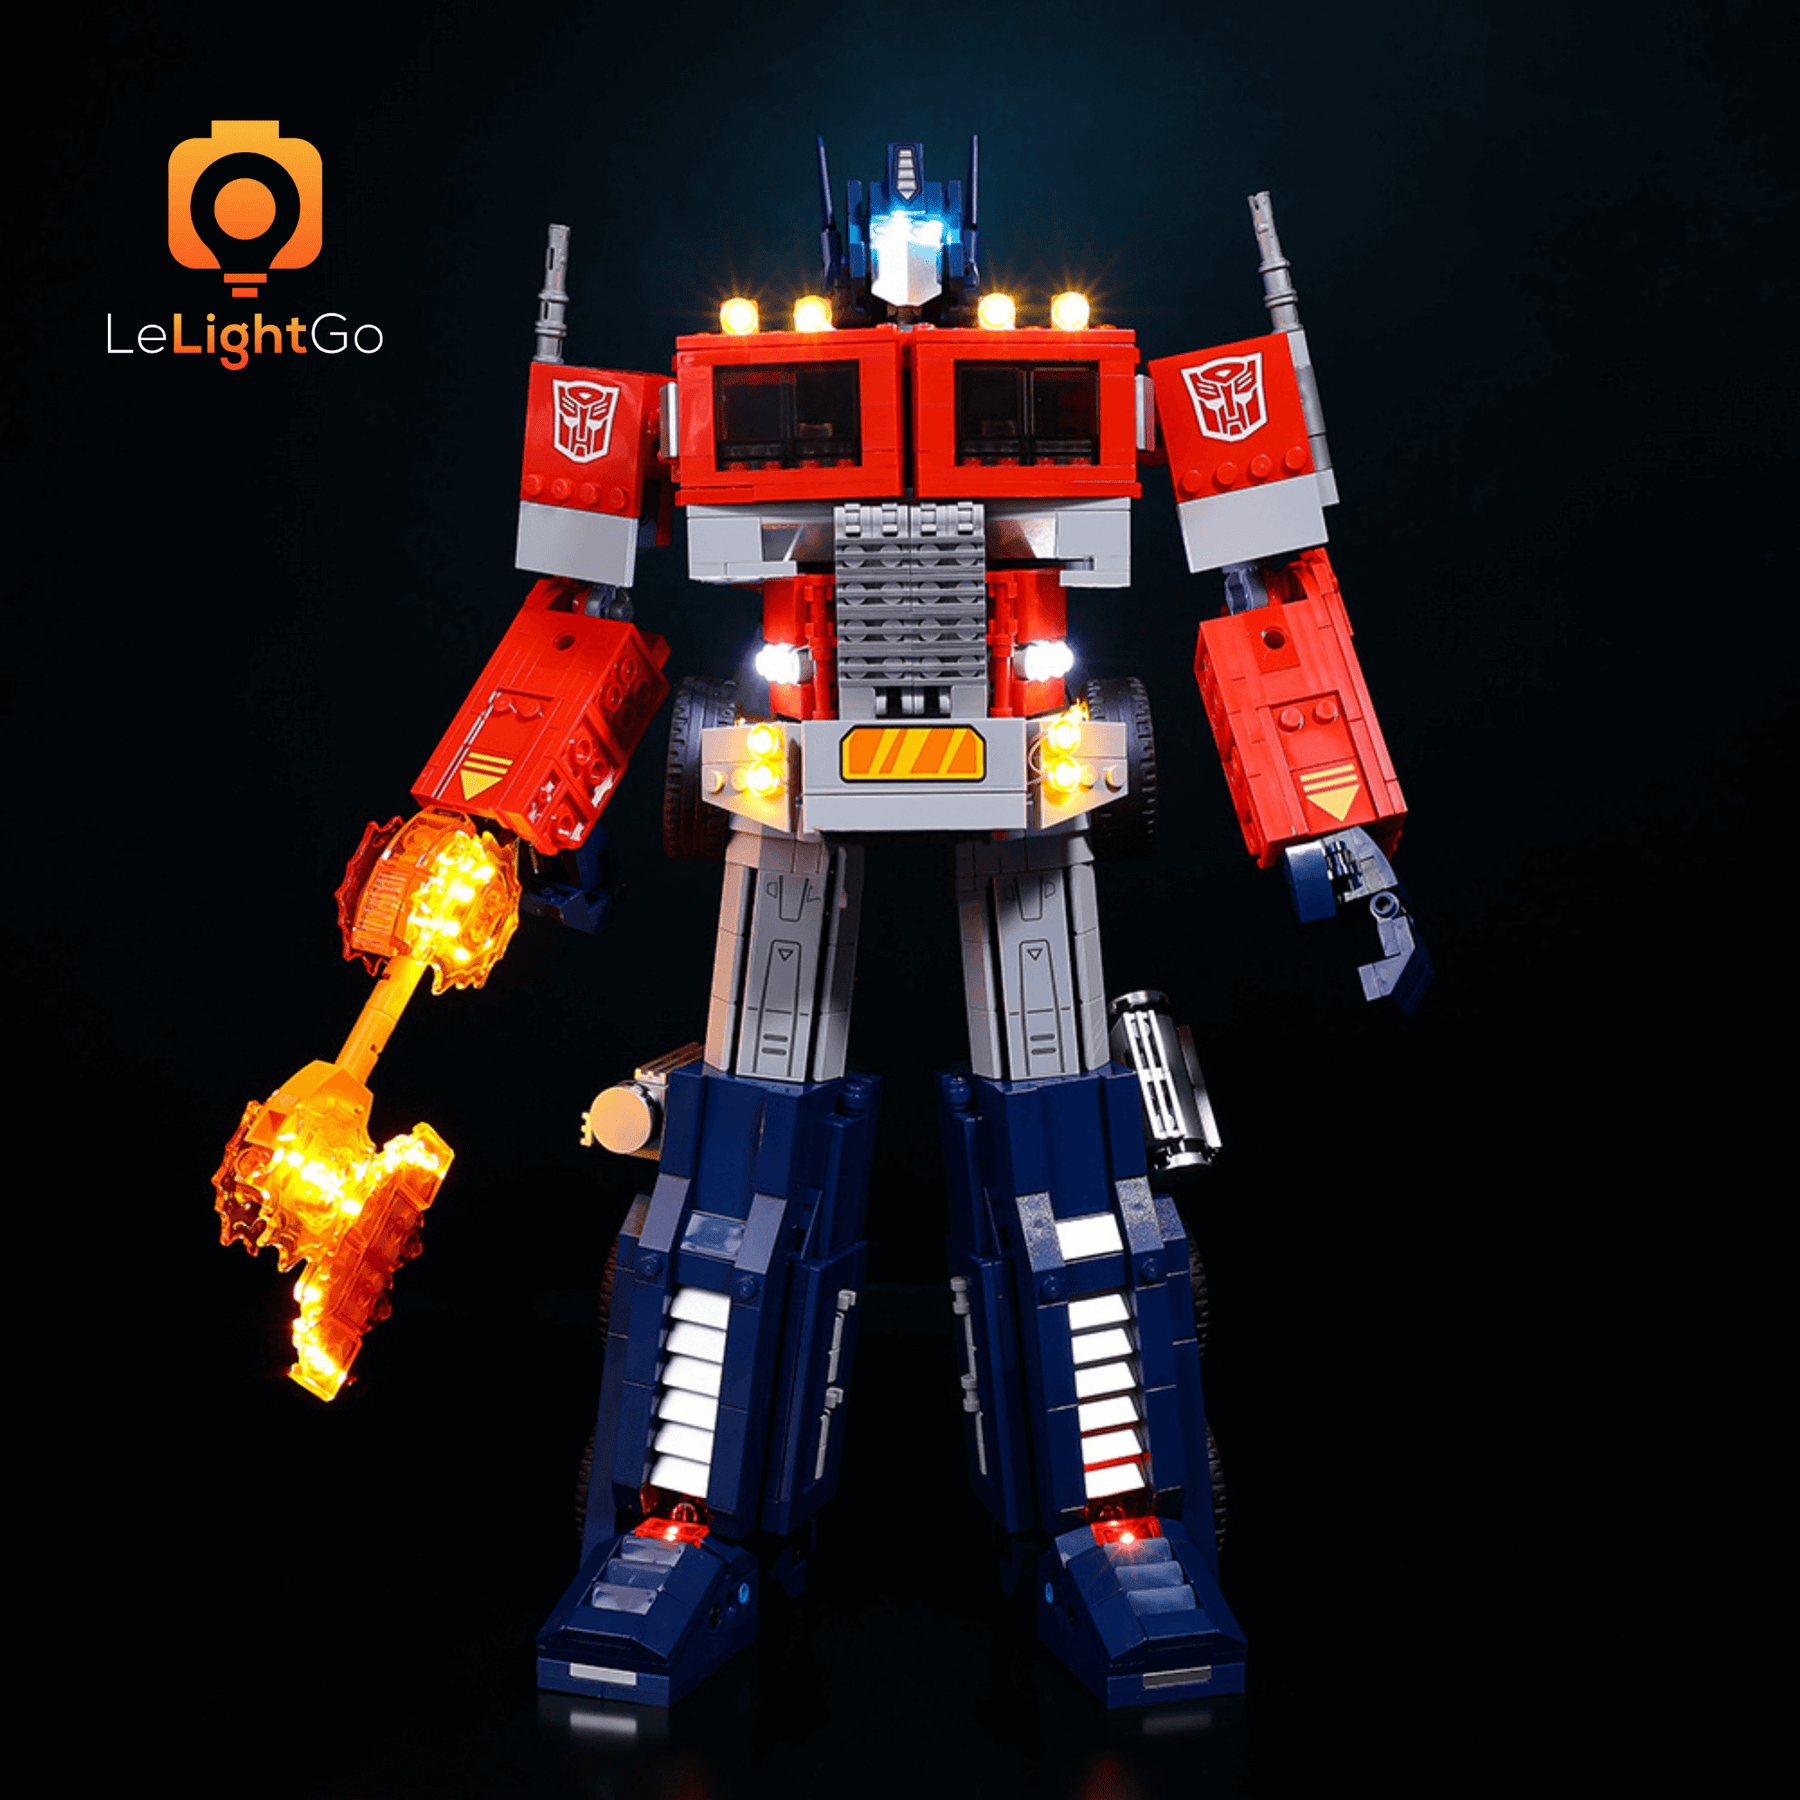 Welkin DC LED Light Kit for Lego Transformers Optimus Prime 10302  Convertible Building Set, USB Connecting Lighting Set Compatible with Lego  10302